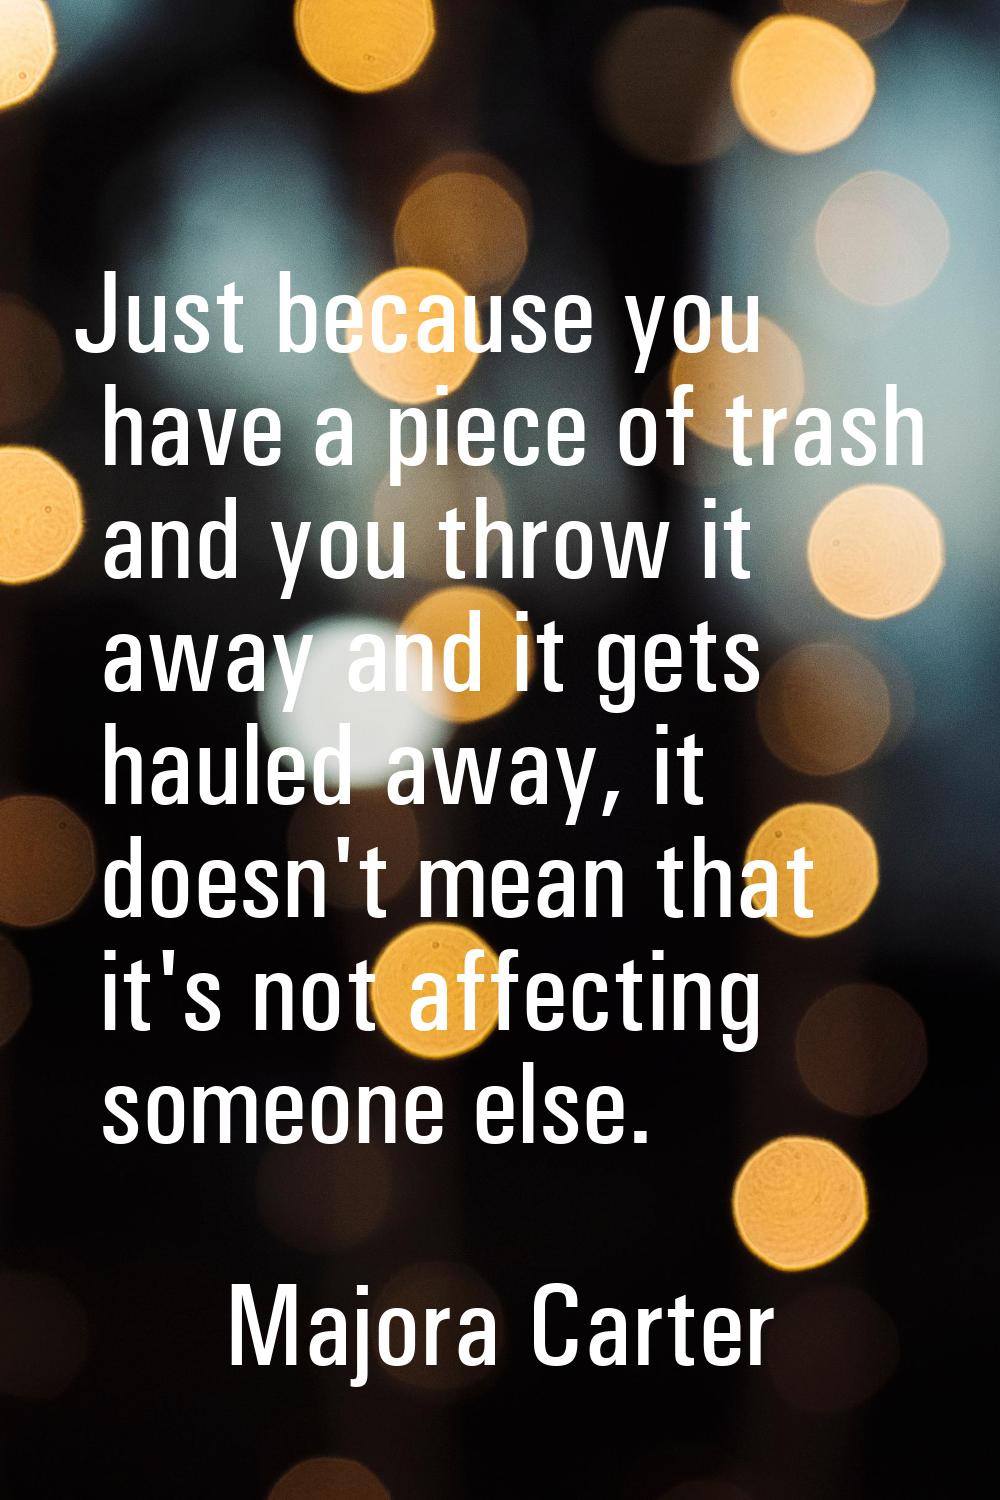 Just because you have a piece of trash and you throw it away and it gets hauled away, it doesn't me